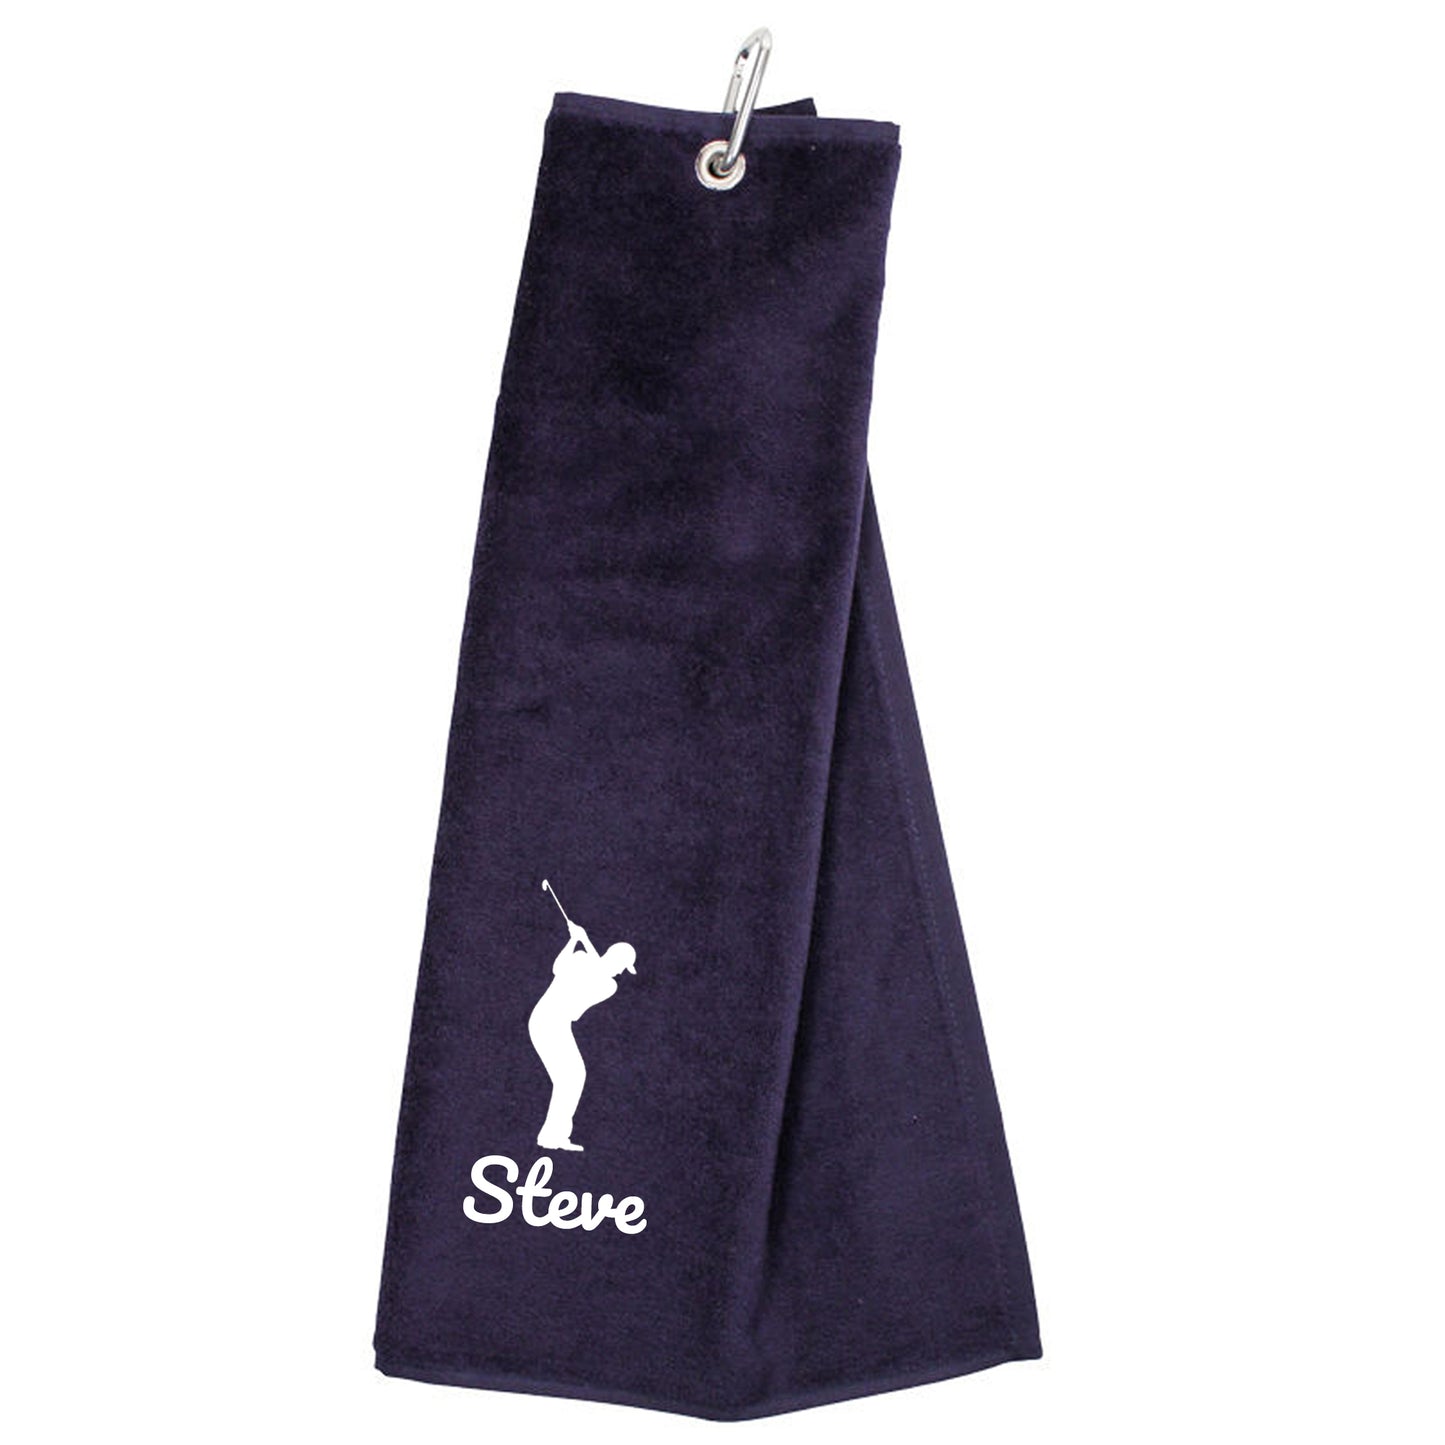 Personalised Embroidered Tri Fold GOLF Towel Trifold Towel with Carabiner Clip  - Always Looking Good - Navy  